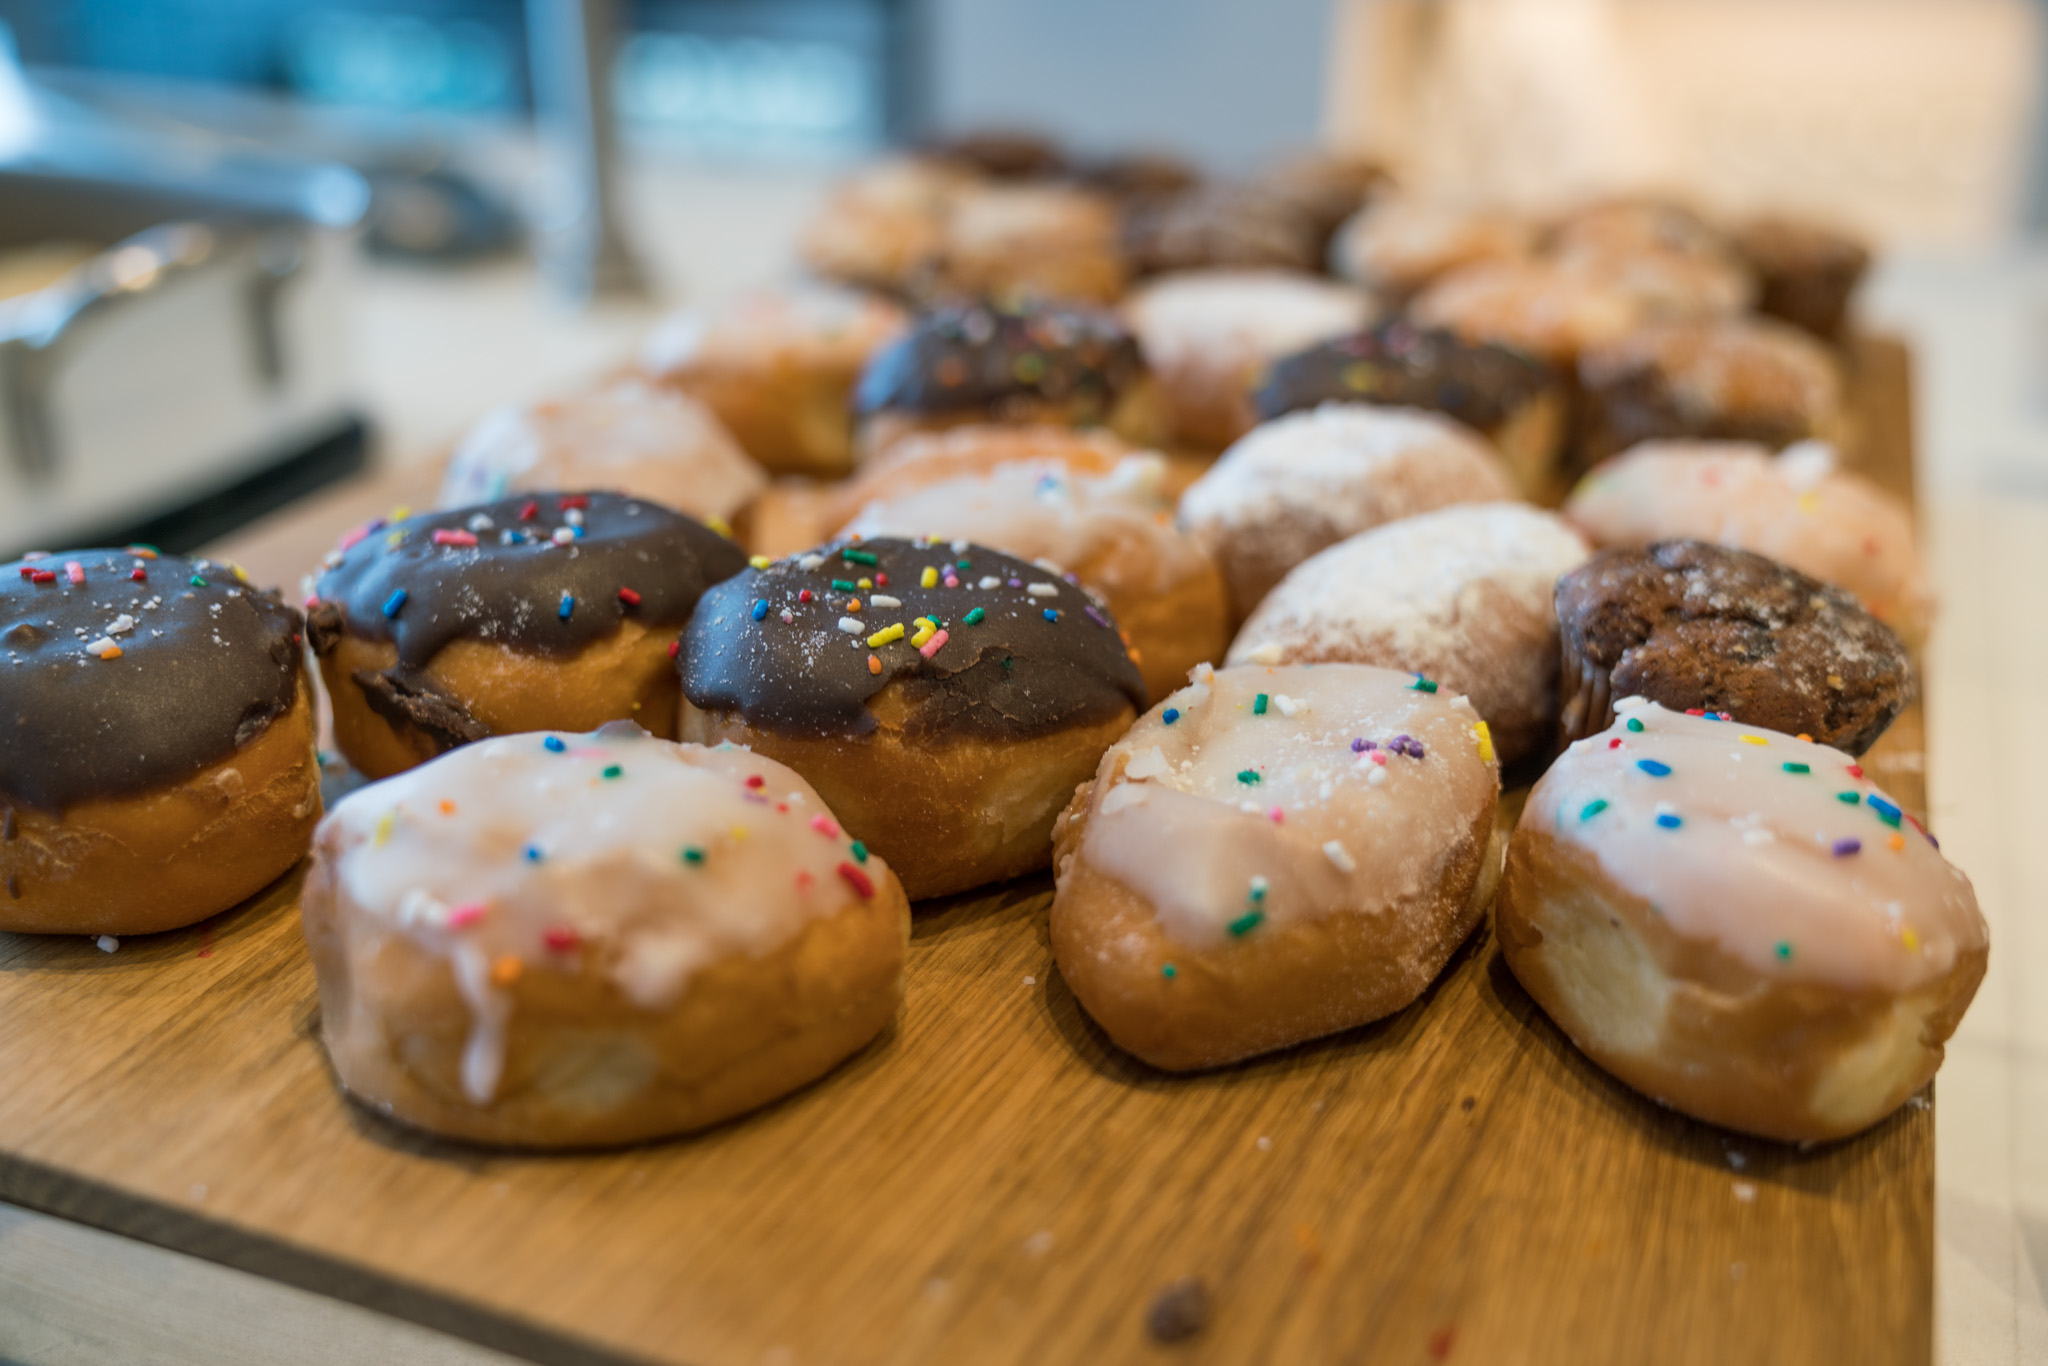 a group of doughnuts on a wooden surface